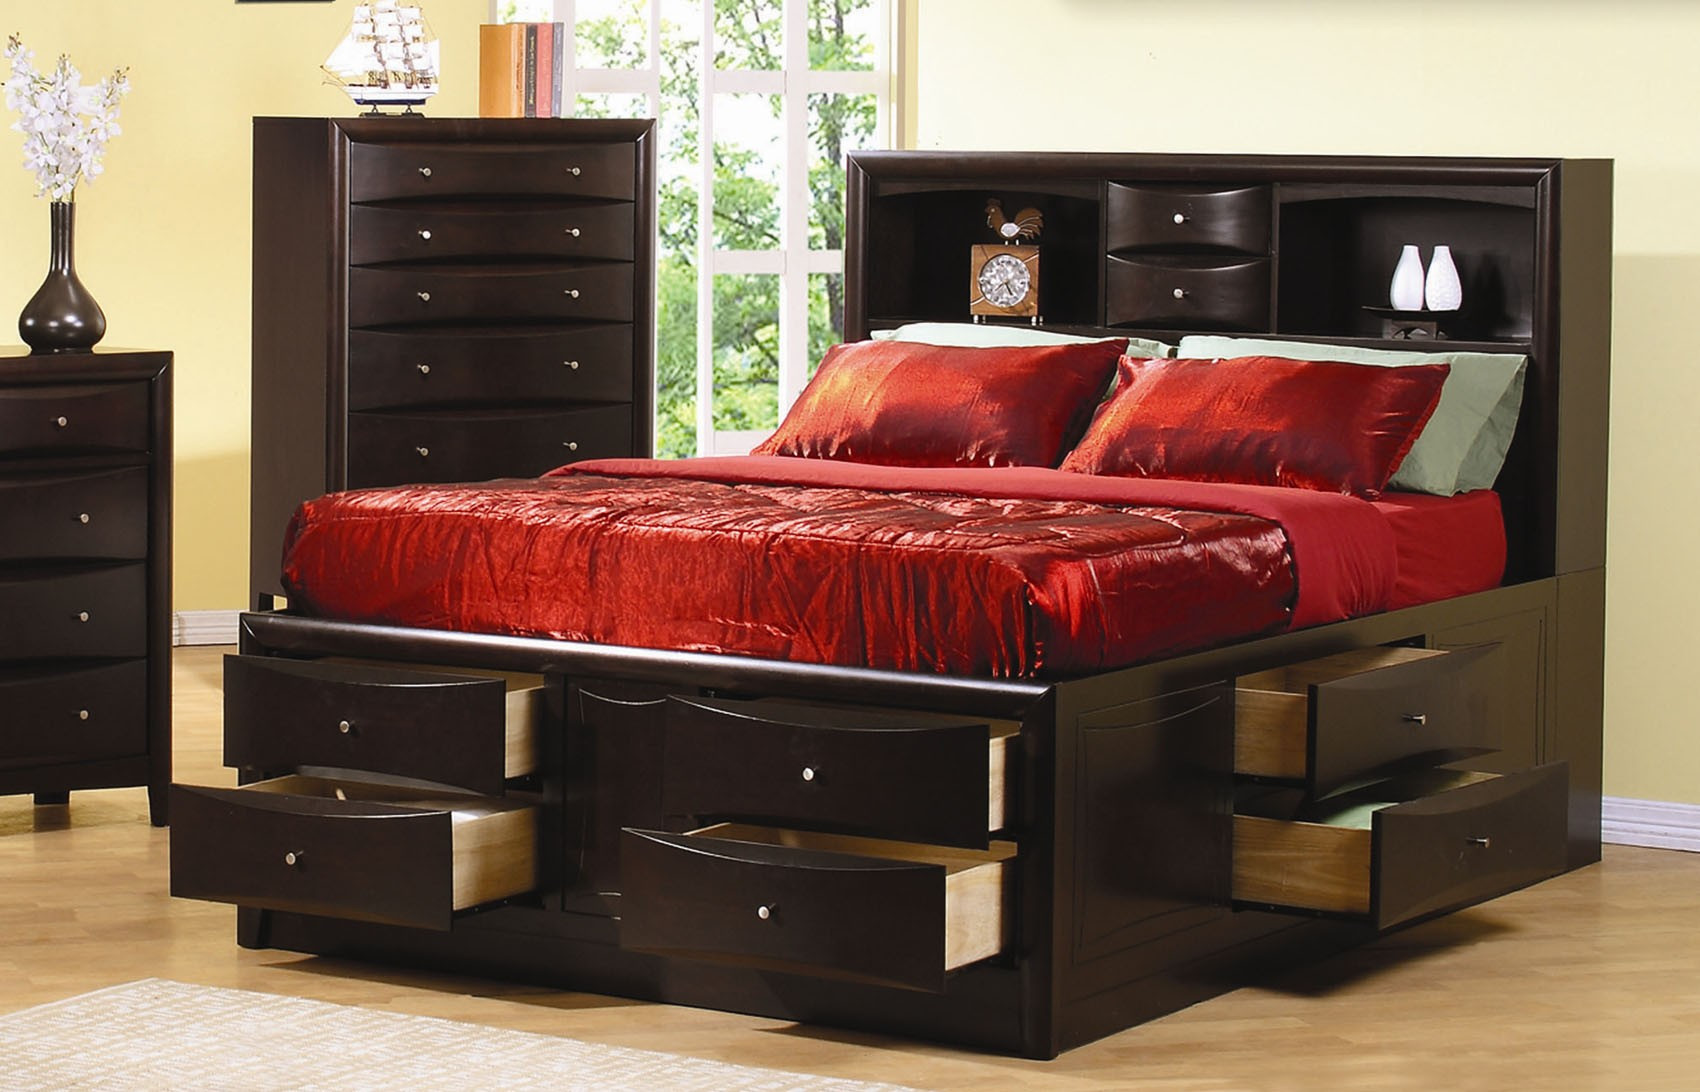 Storage Bedroom Set
 A Lot of Bedroom Storage Ideas for the Better yet Well